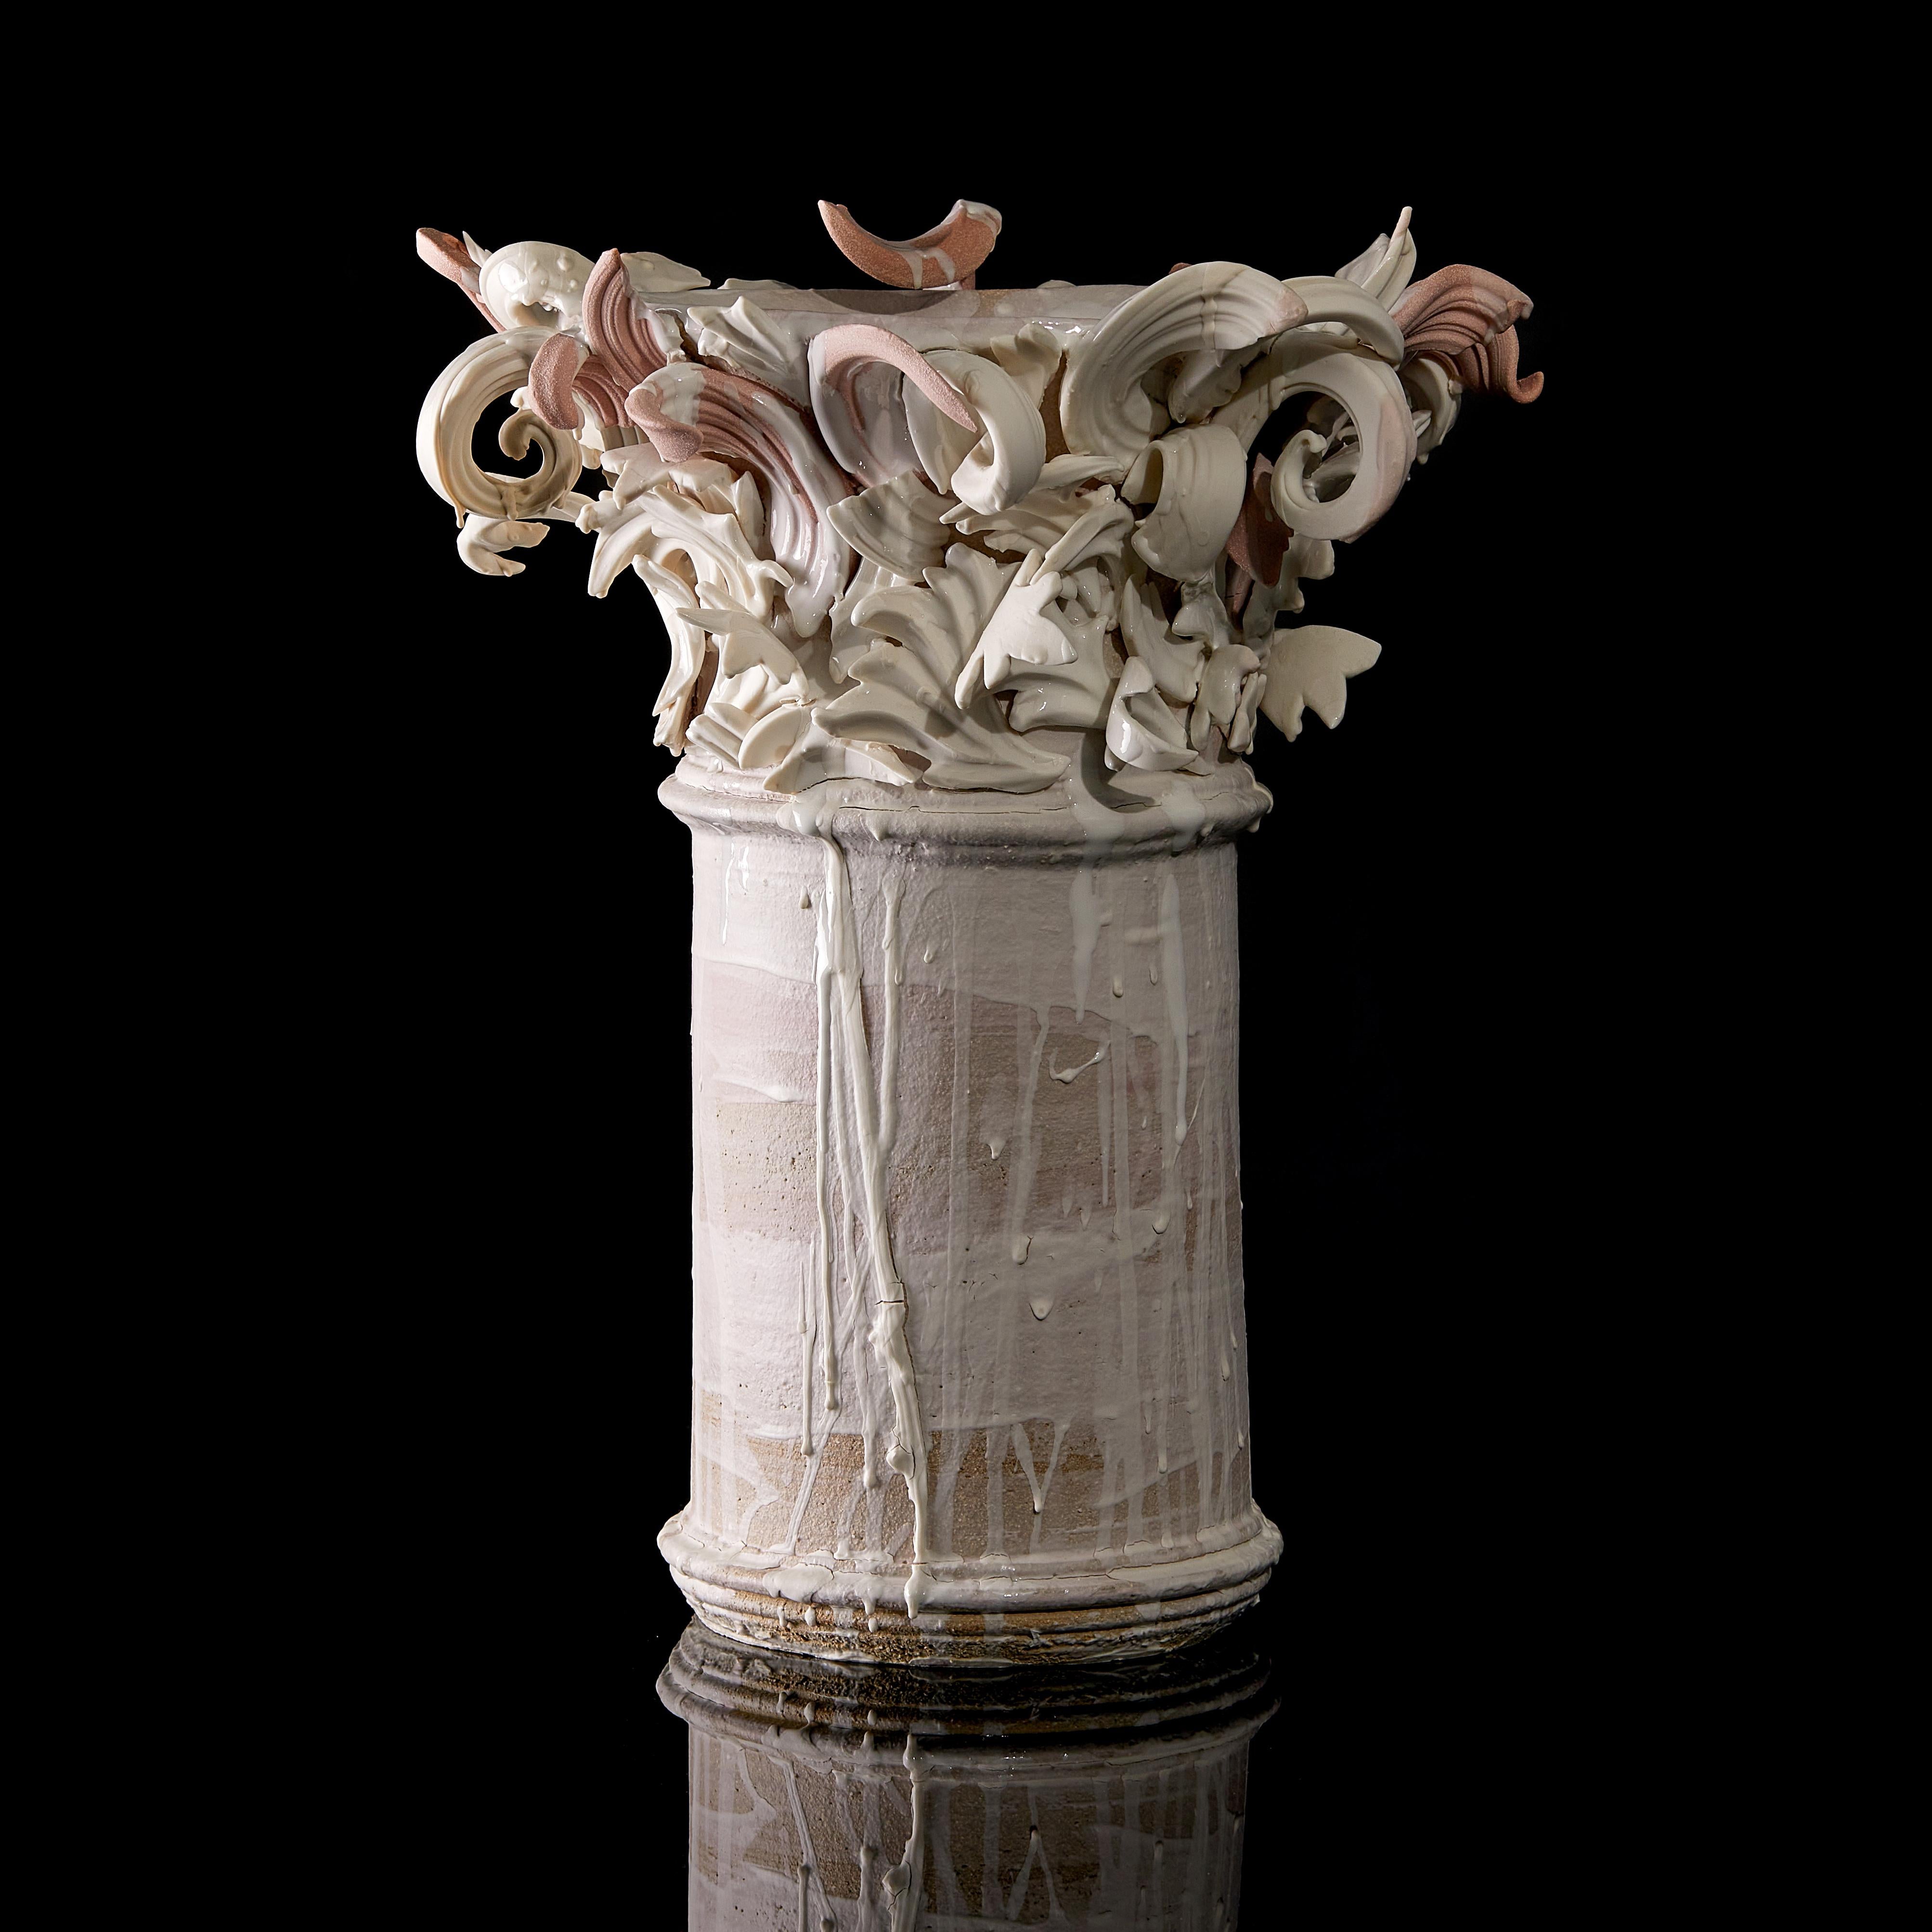 Colonnade III, a Unique Ceramic Sculptural Vase in Pink & White by Jo Taylor 2